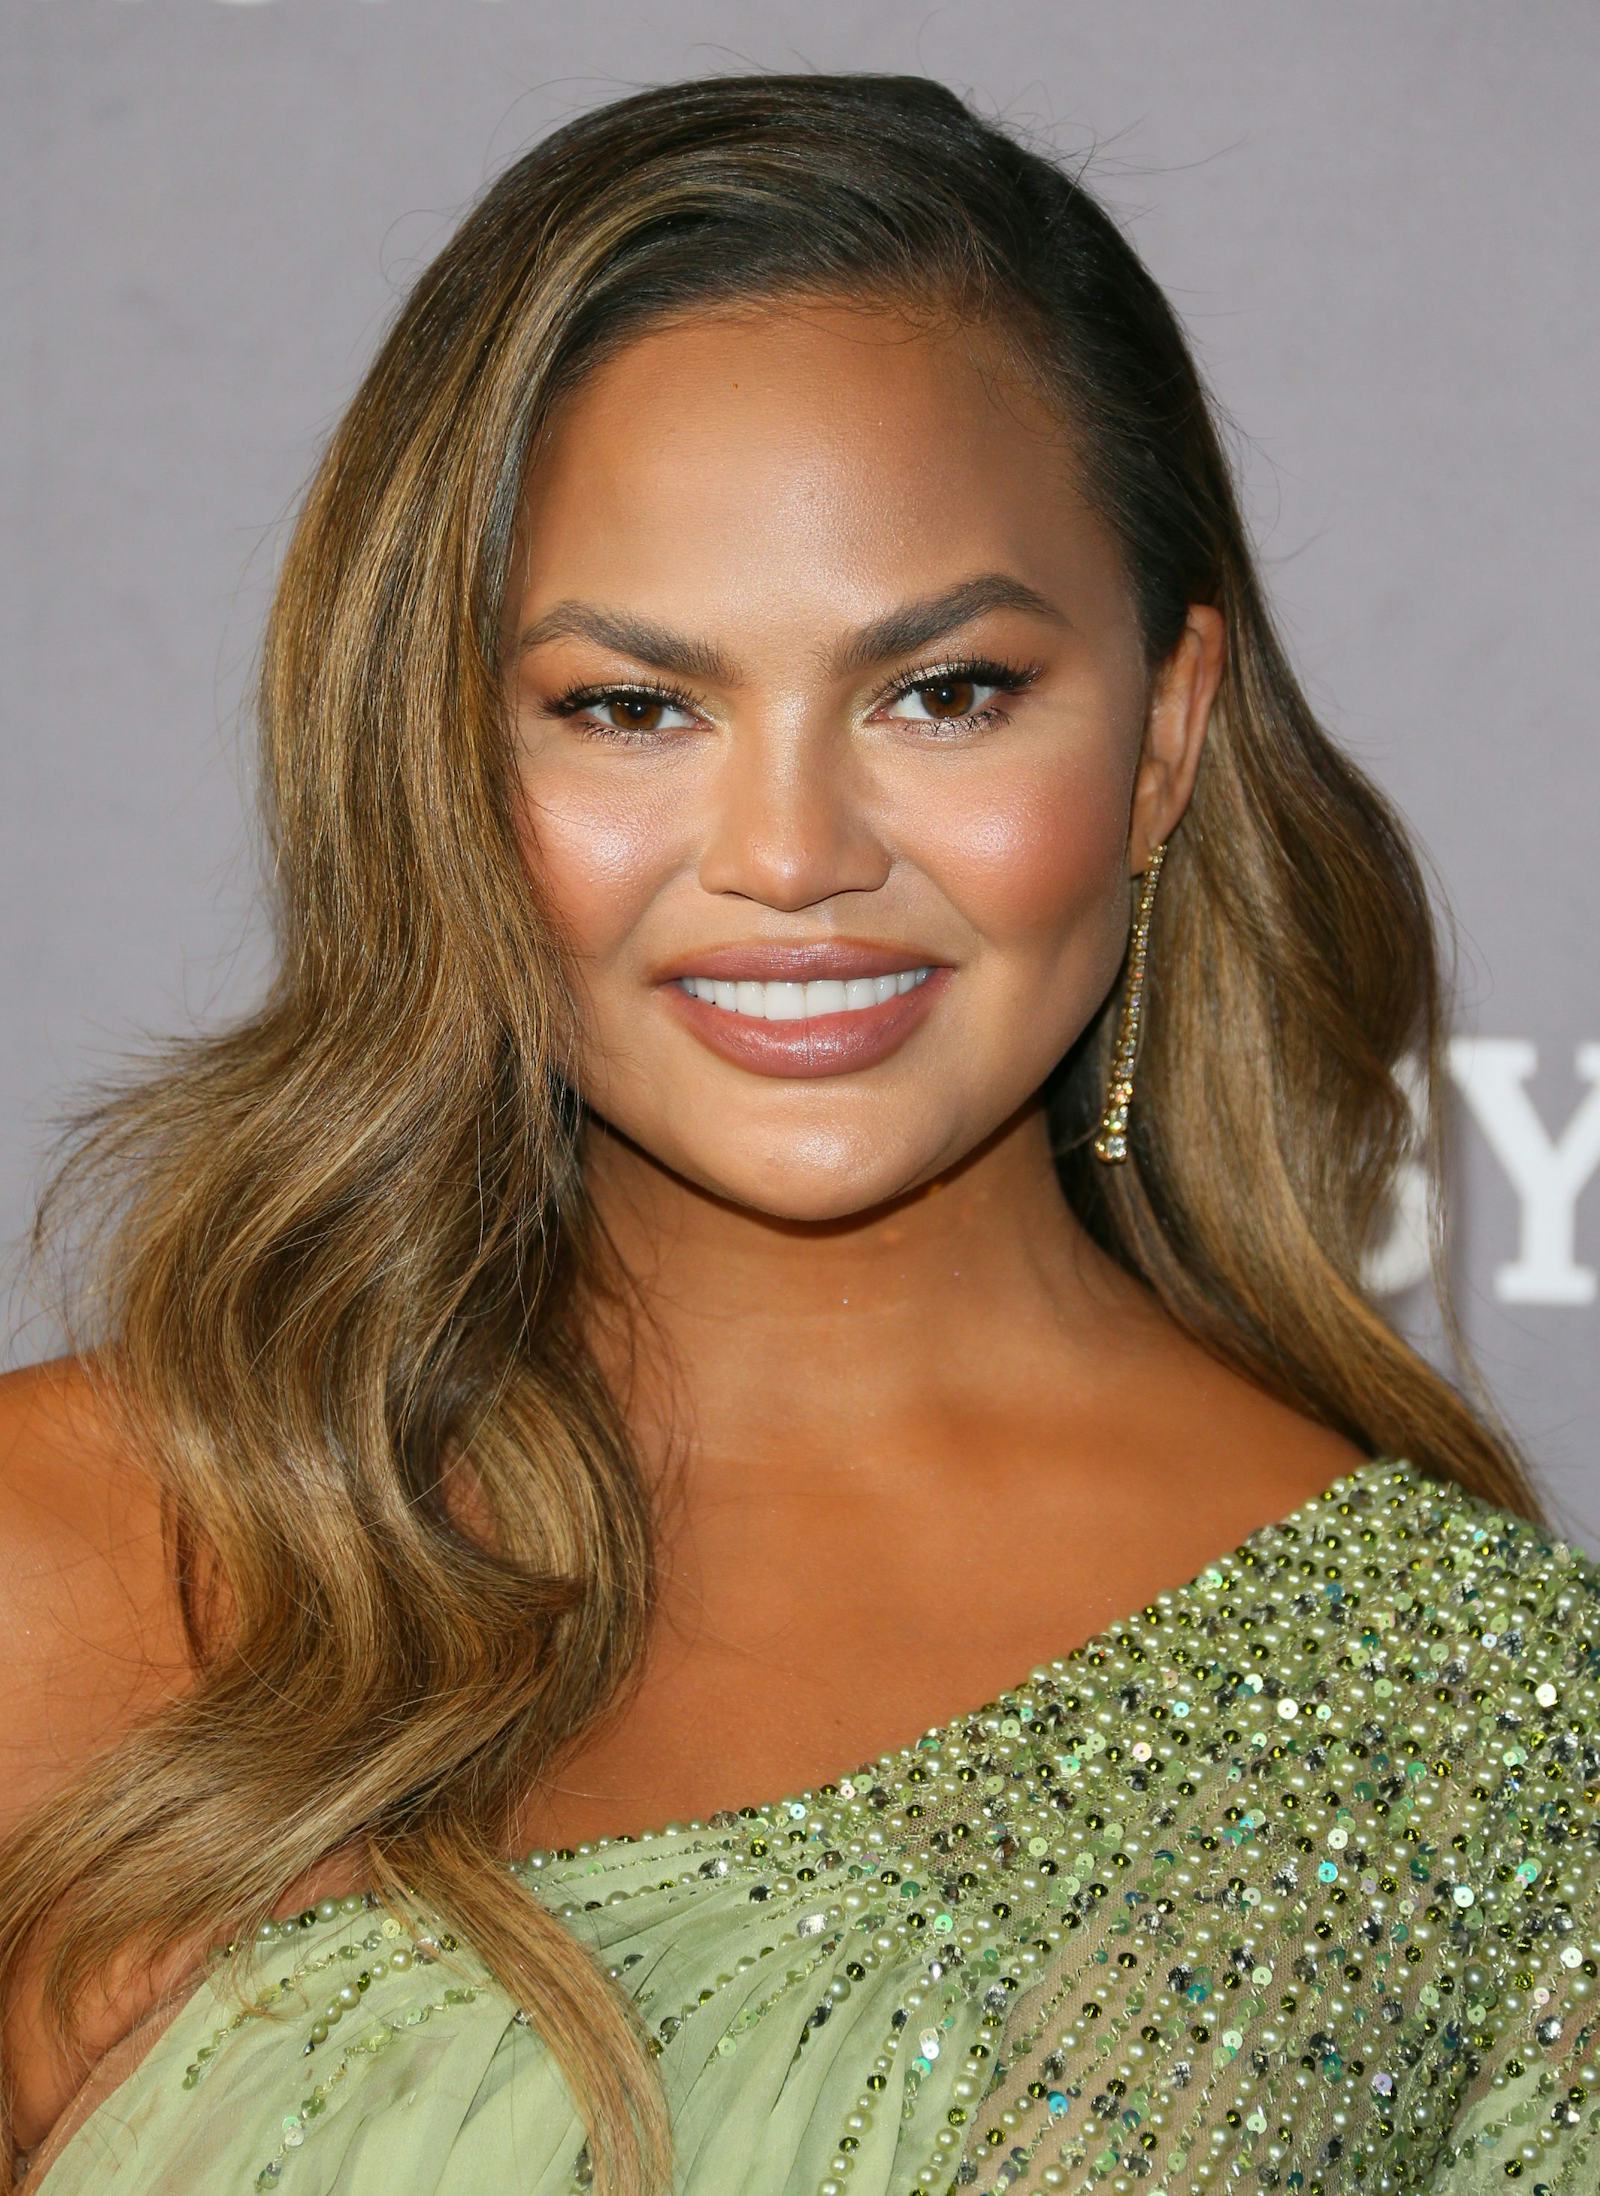 How Chrissy Teigen Found Out She Was Pregnant Is Quite A Story